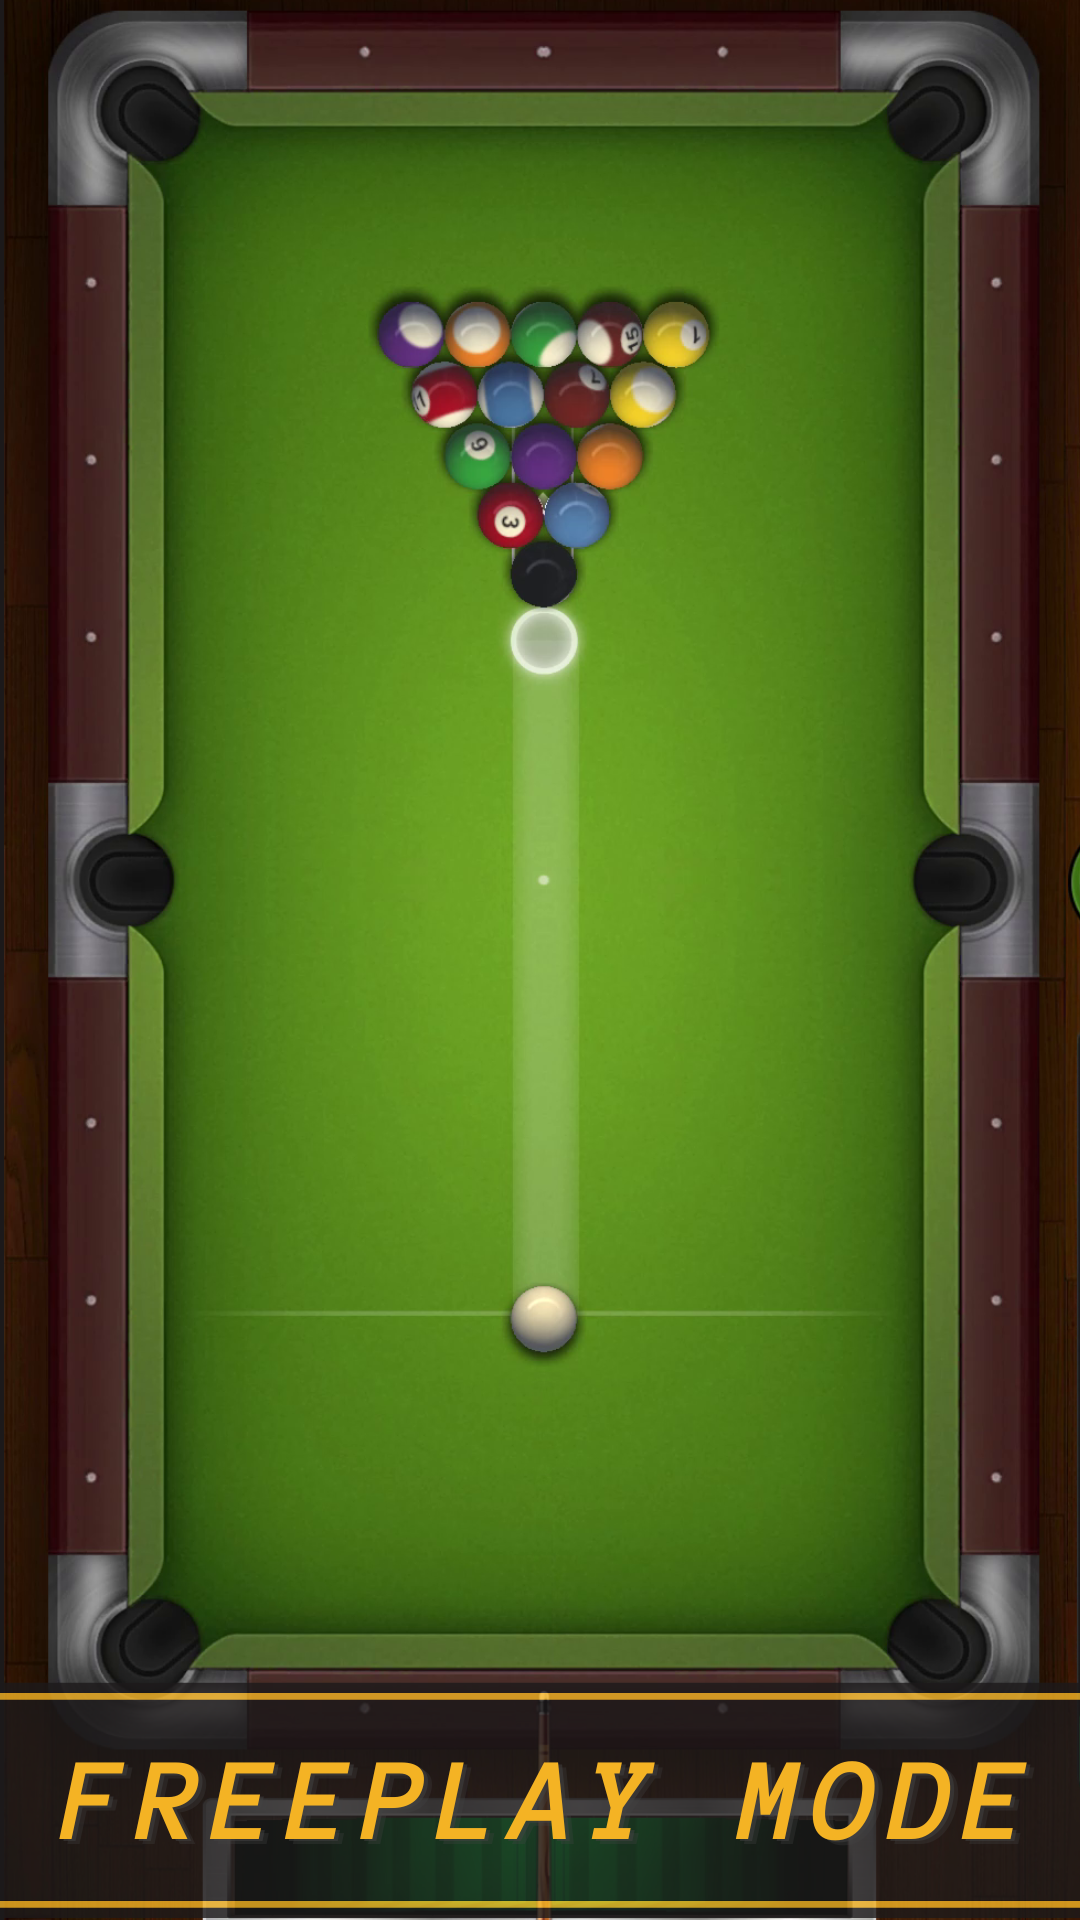 8 Ball Pool - APK Download for Android